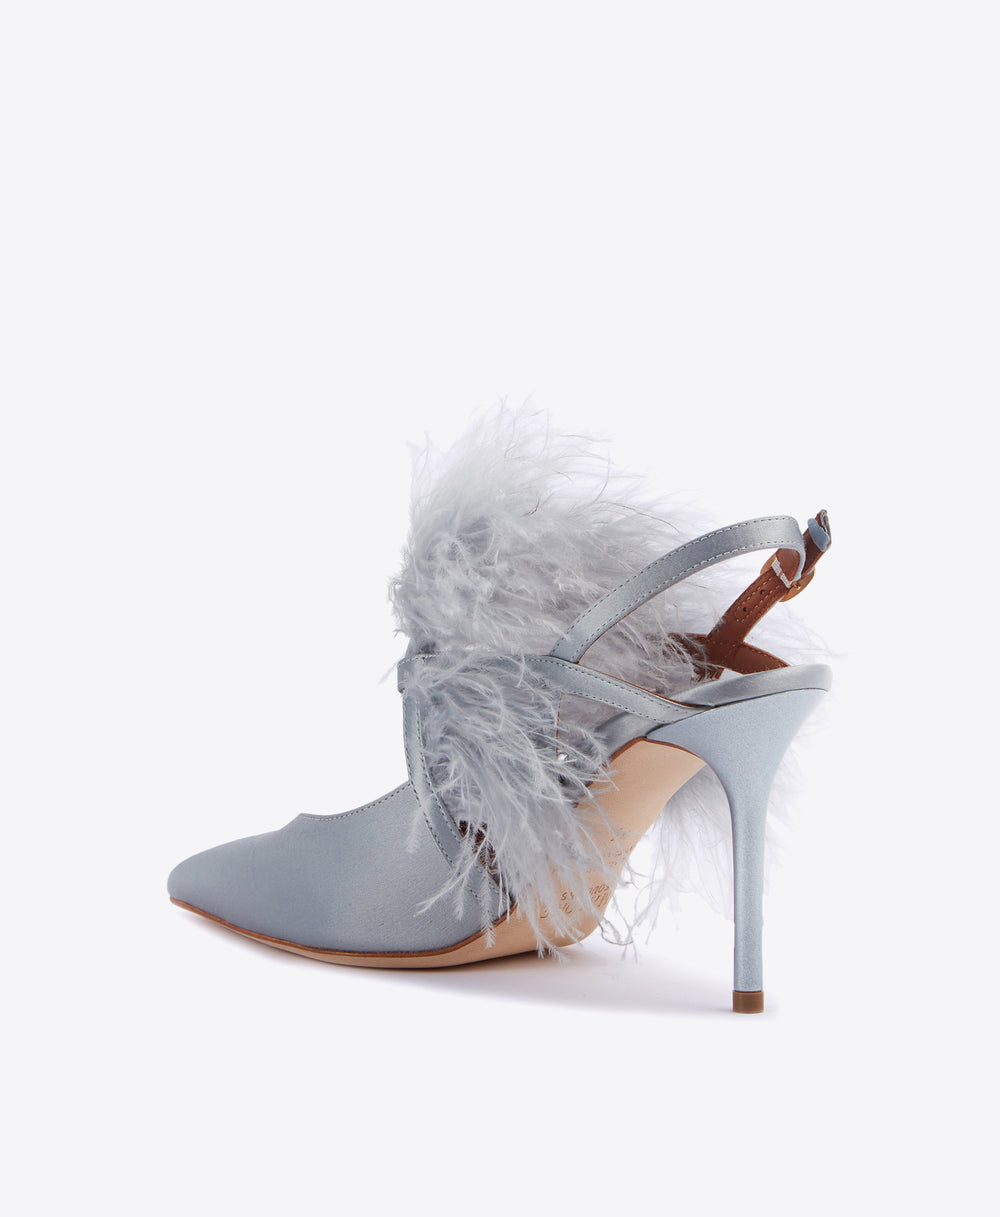 Women's Baby Blue Satin Slingback Heels with Feathers Malone Souliers